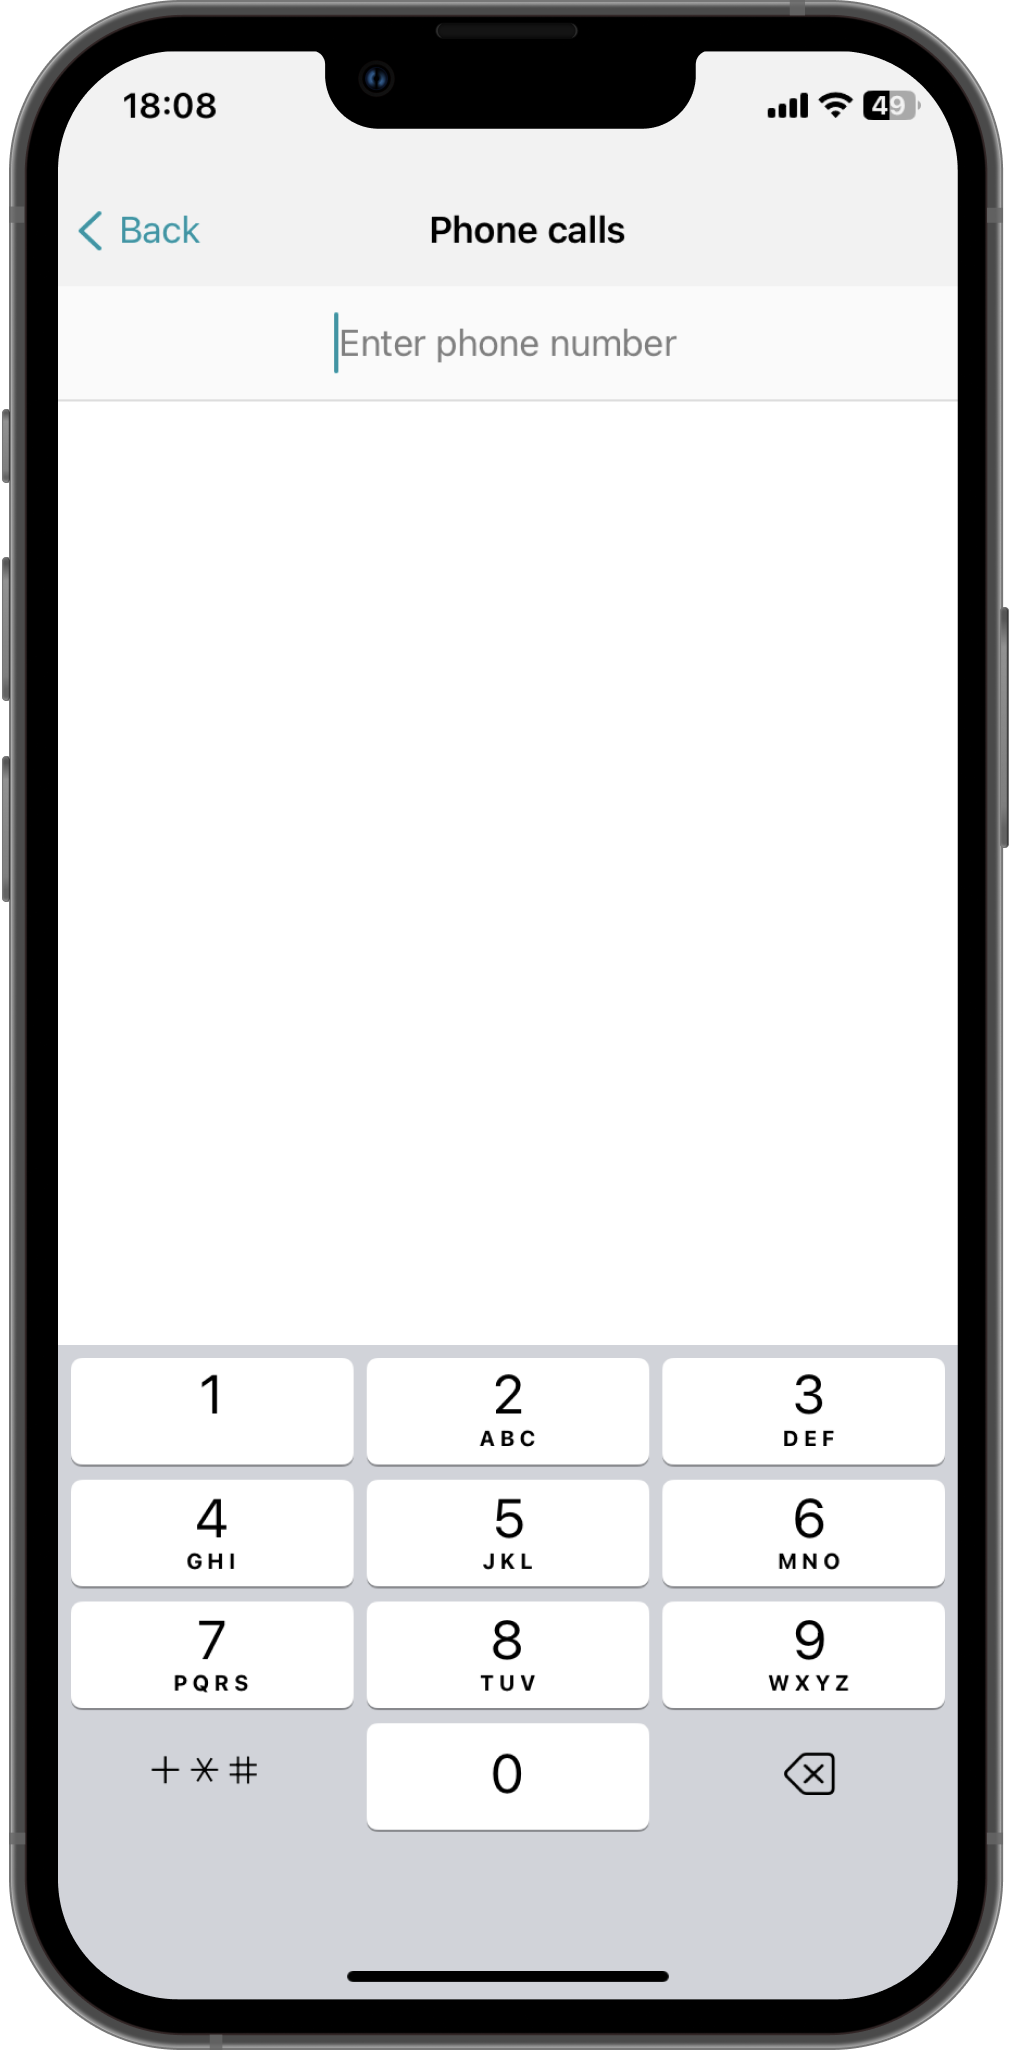 TrueConf 3.4.3 for iOS: Easy dialer startup, indicator of disabled microphone, and updated Options menu 3